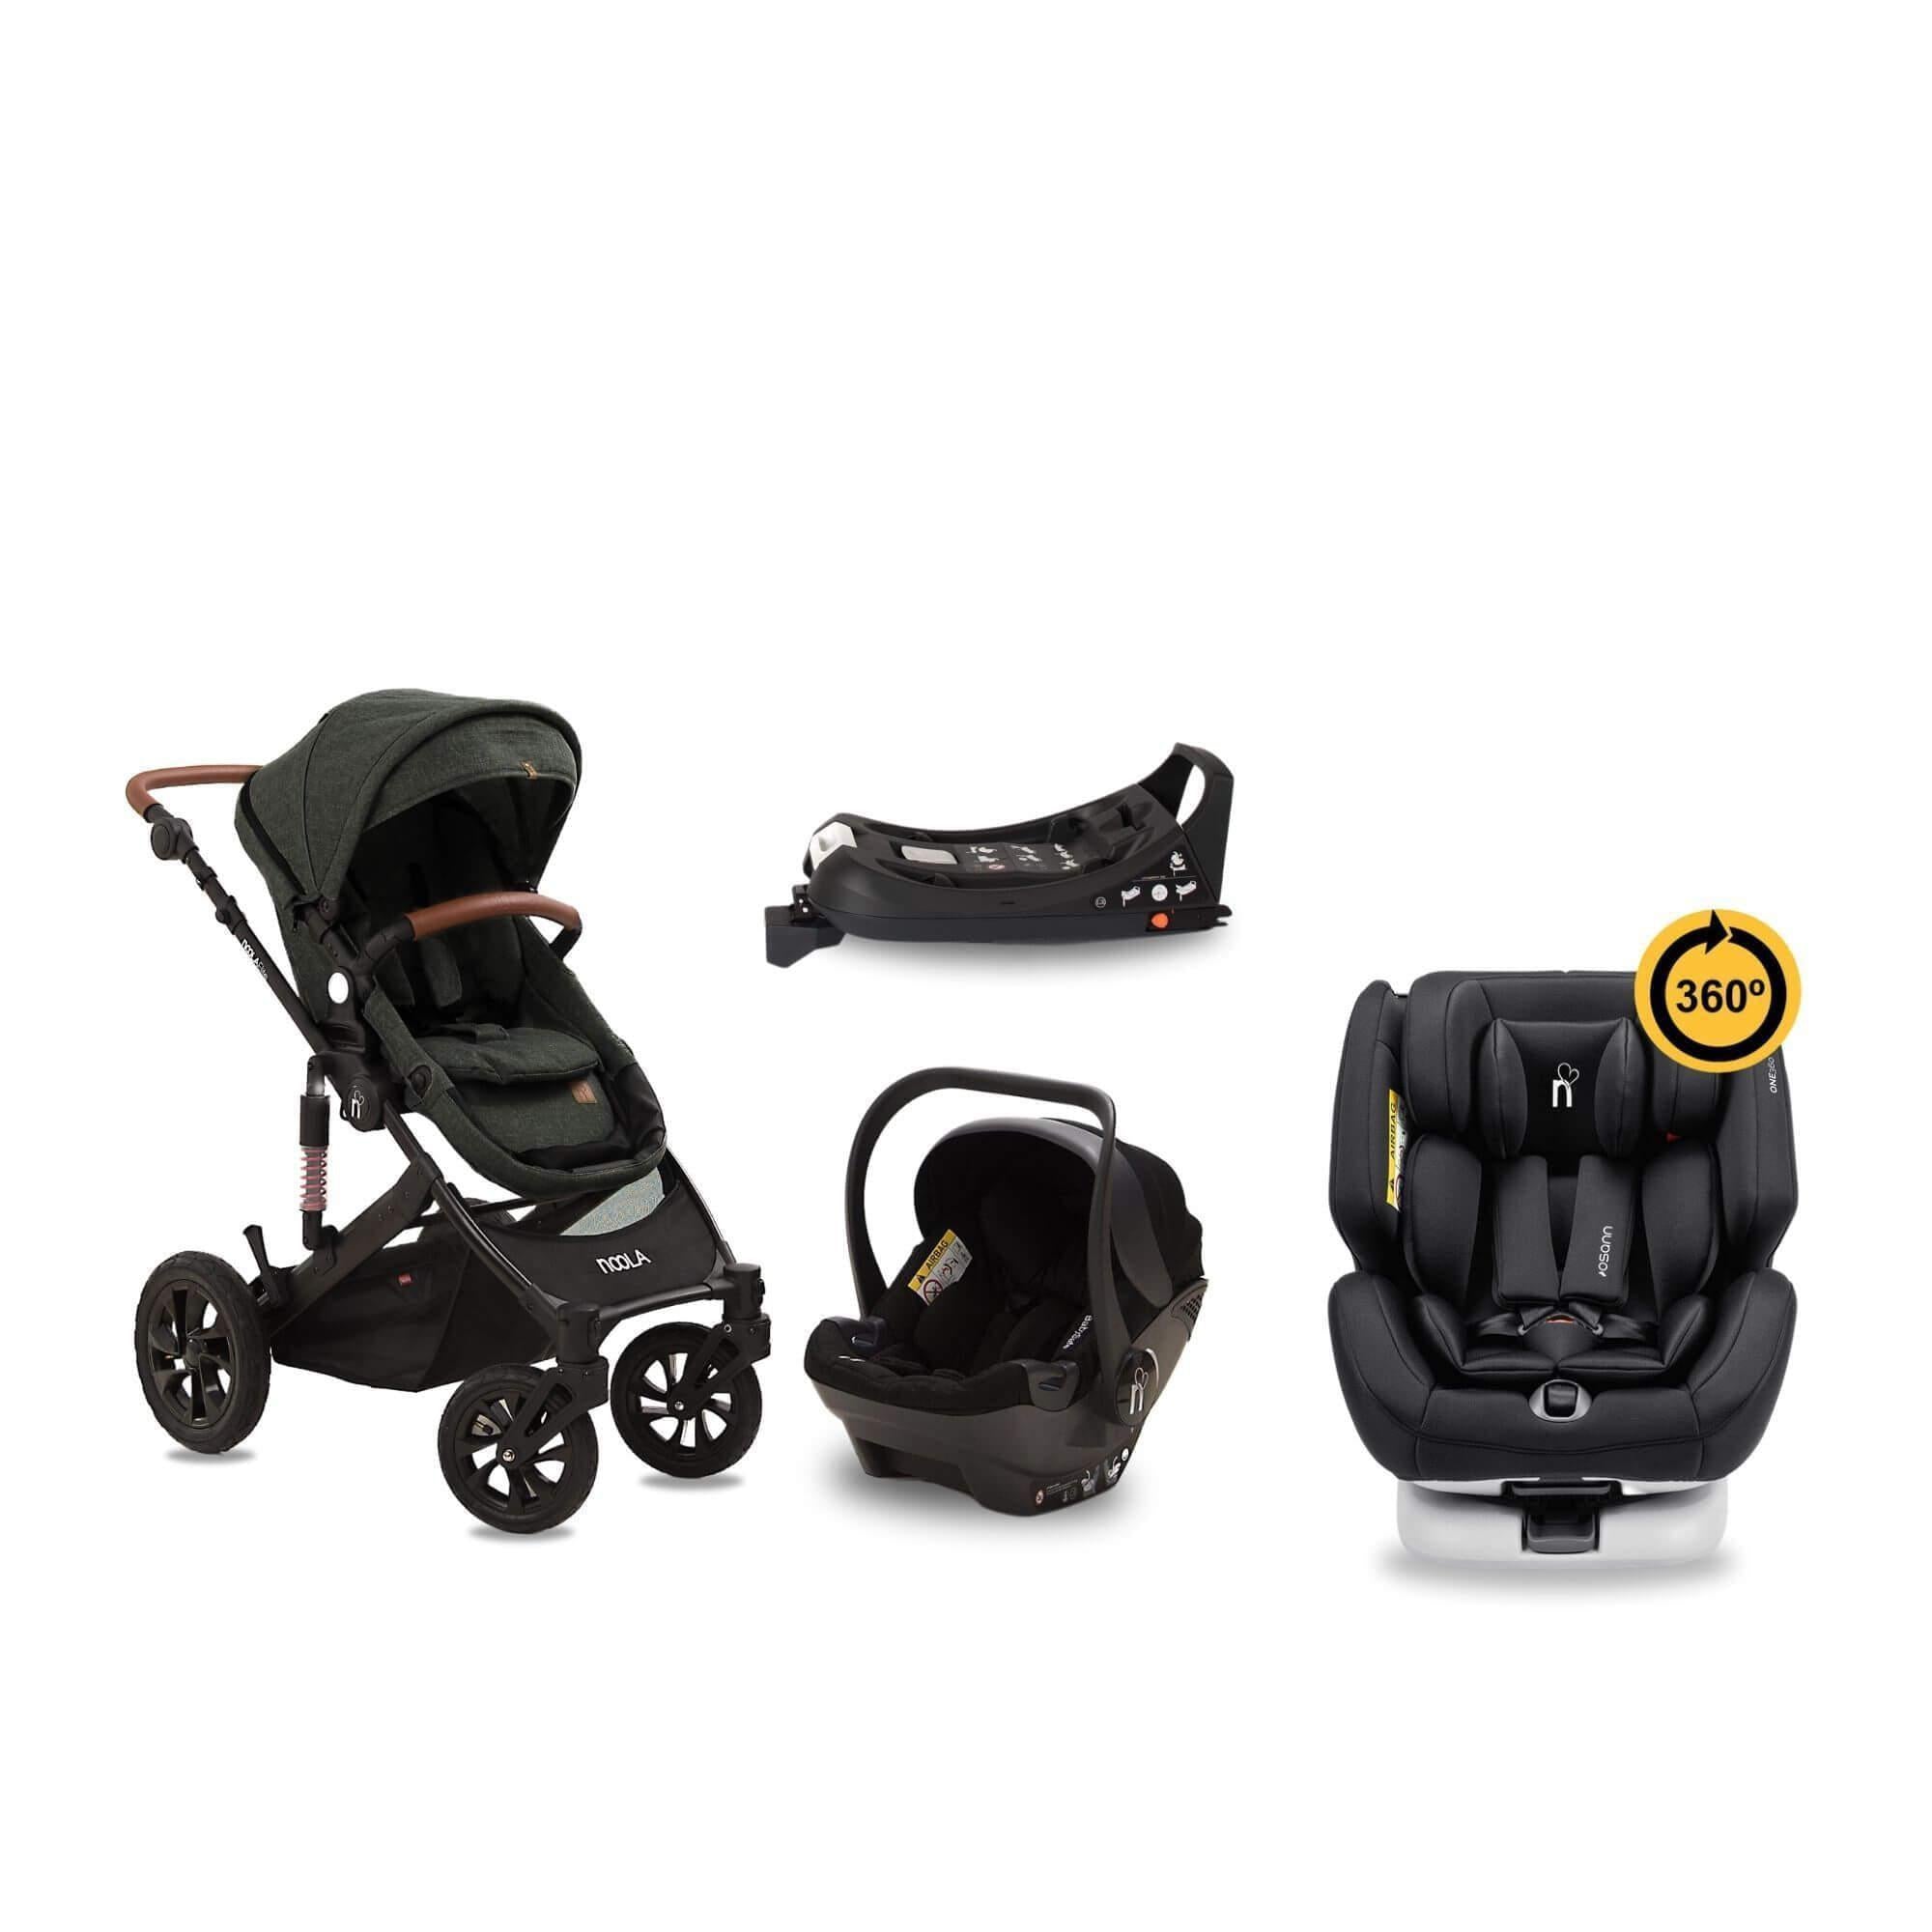 noola elite 5in1 all terrain baby toddler travel system french olive #SELECT THE COLOUR OF YOUR ONE360_ONE360 | LUNAR GREY